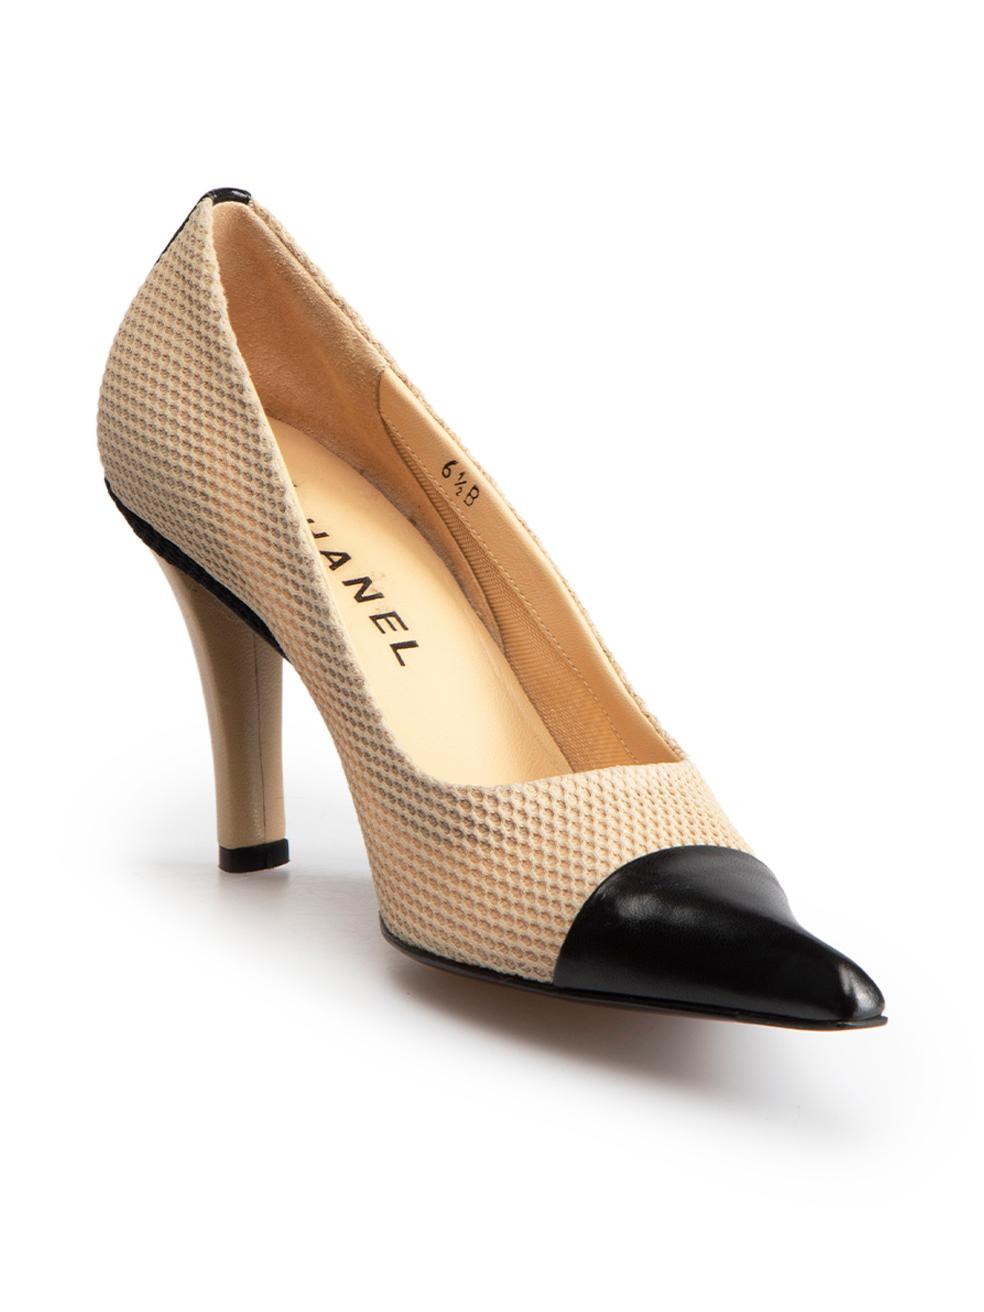 CONDITION is Very good. Minimal wear to shoes is evident. Minimal wear to both shoe toes and the right shoe heel with abrasions to the leather on this used Chanel designer resale item.
 
 Details
 Nude
 Mesh
 Pumps
 High heeled
 Point toe
 Black